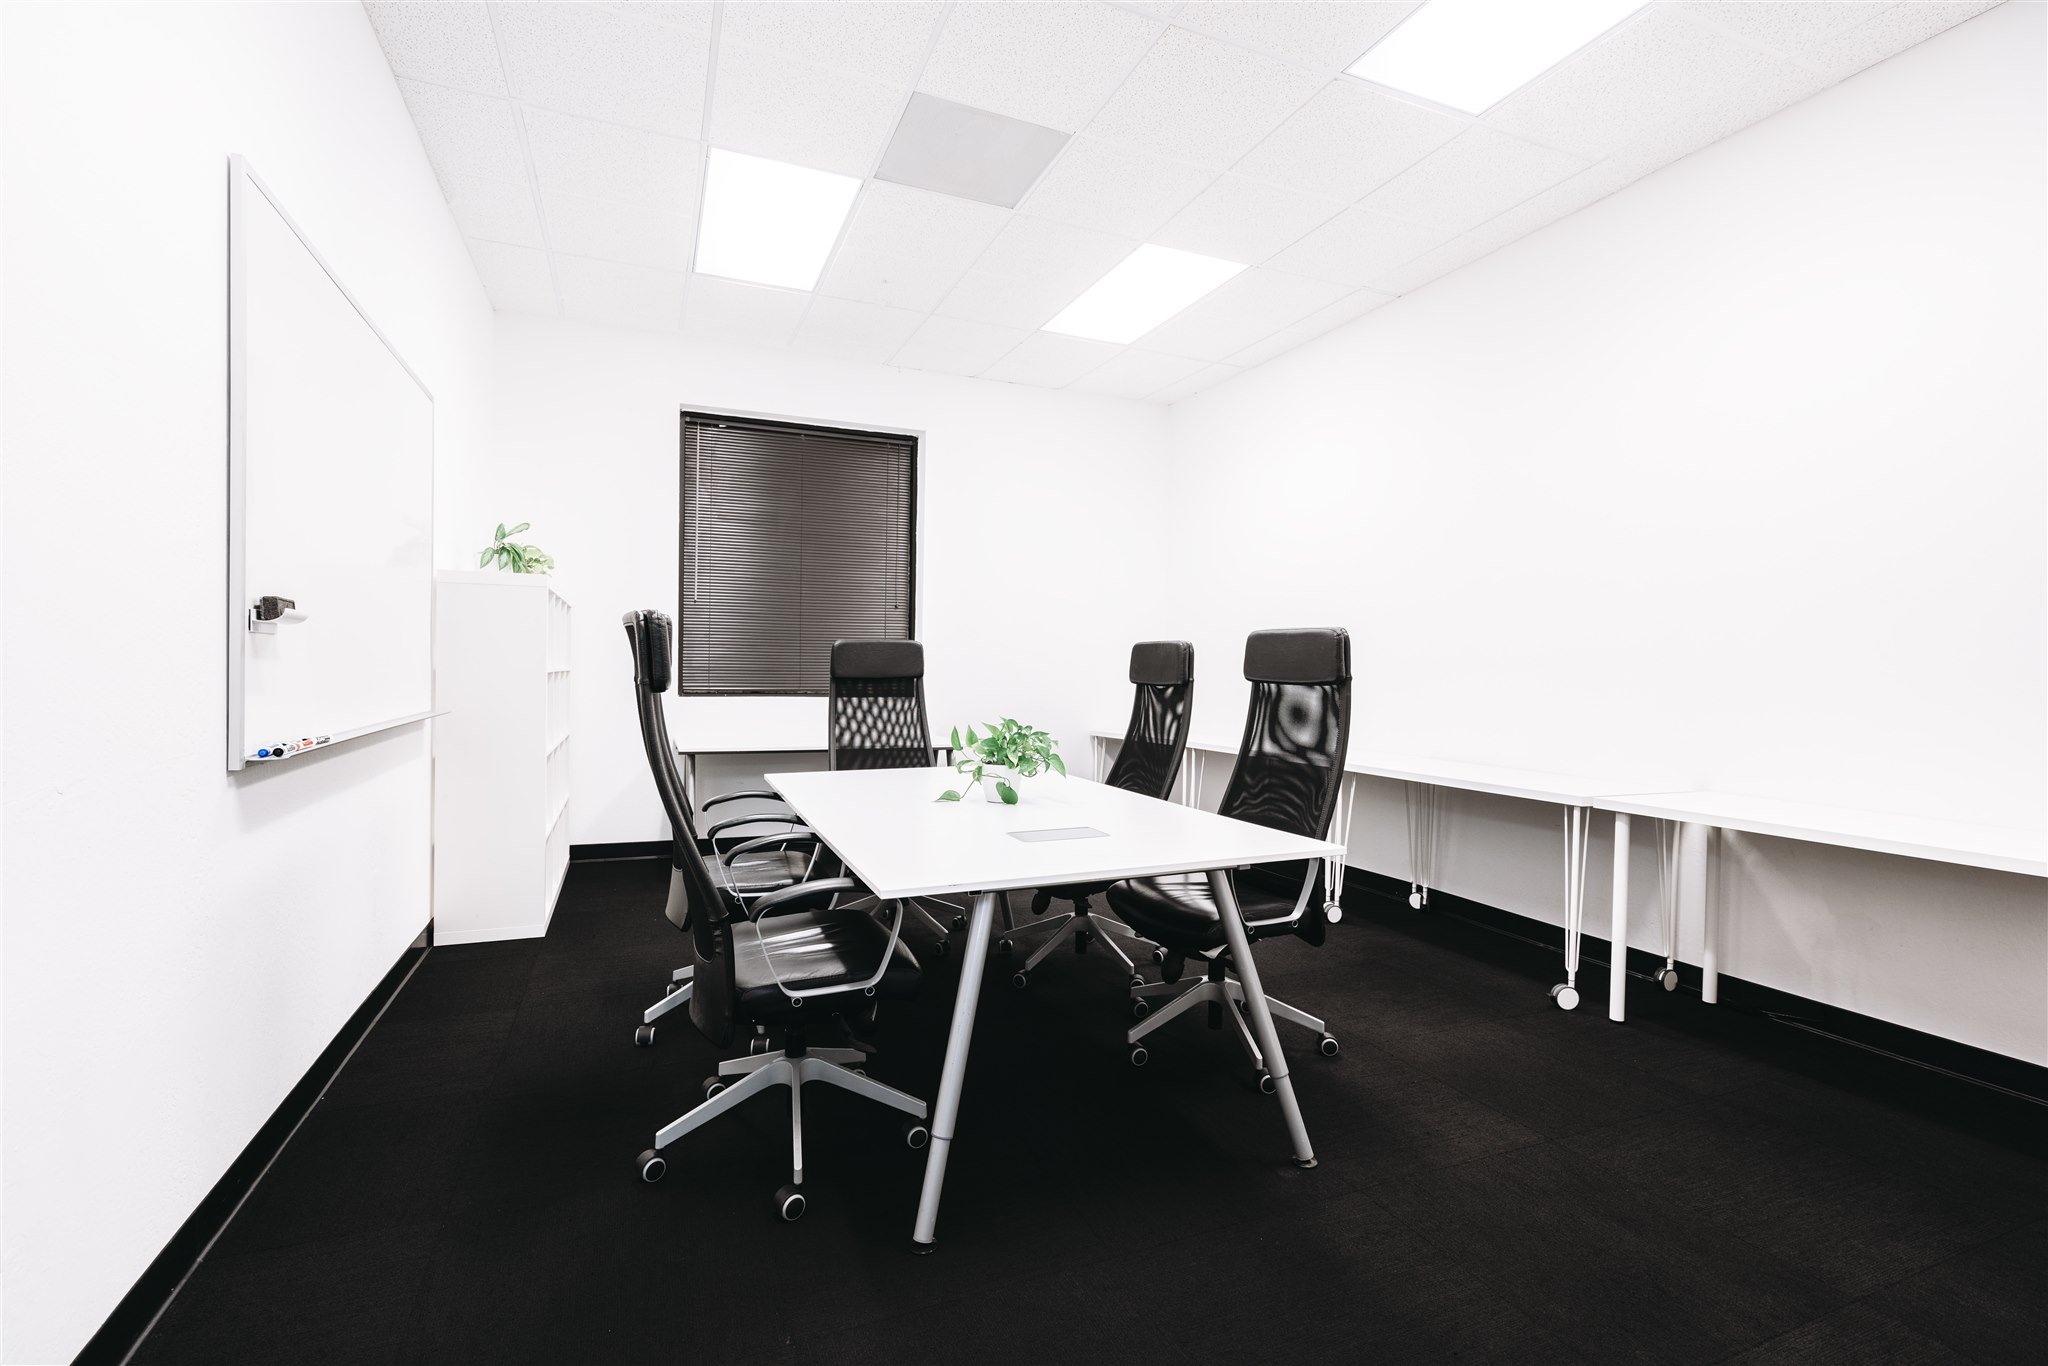 Copy of private office shared space near me.jpg